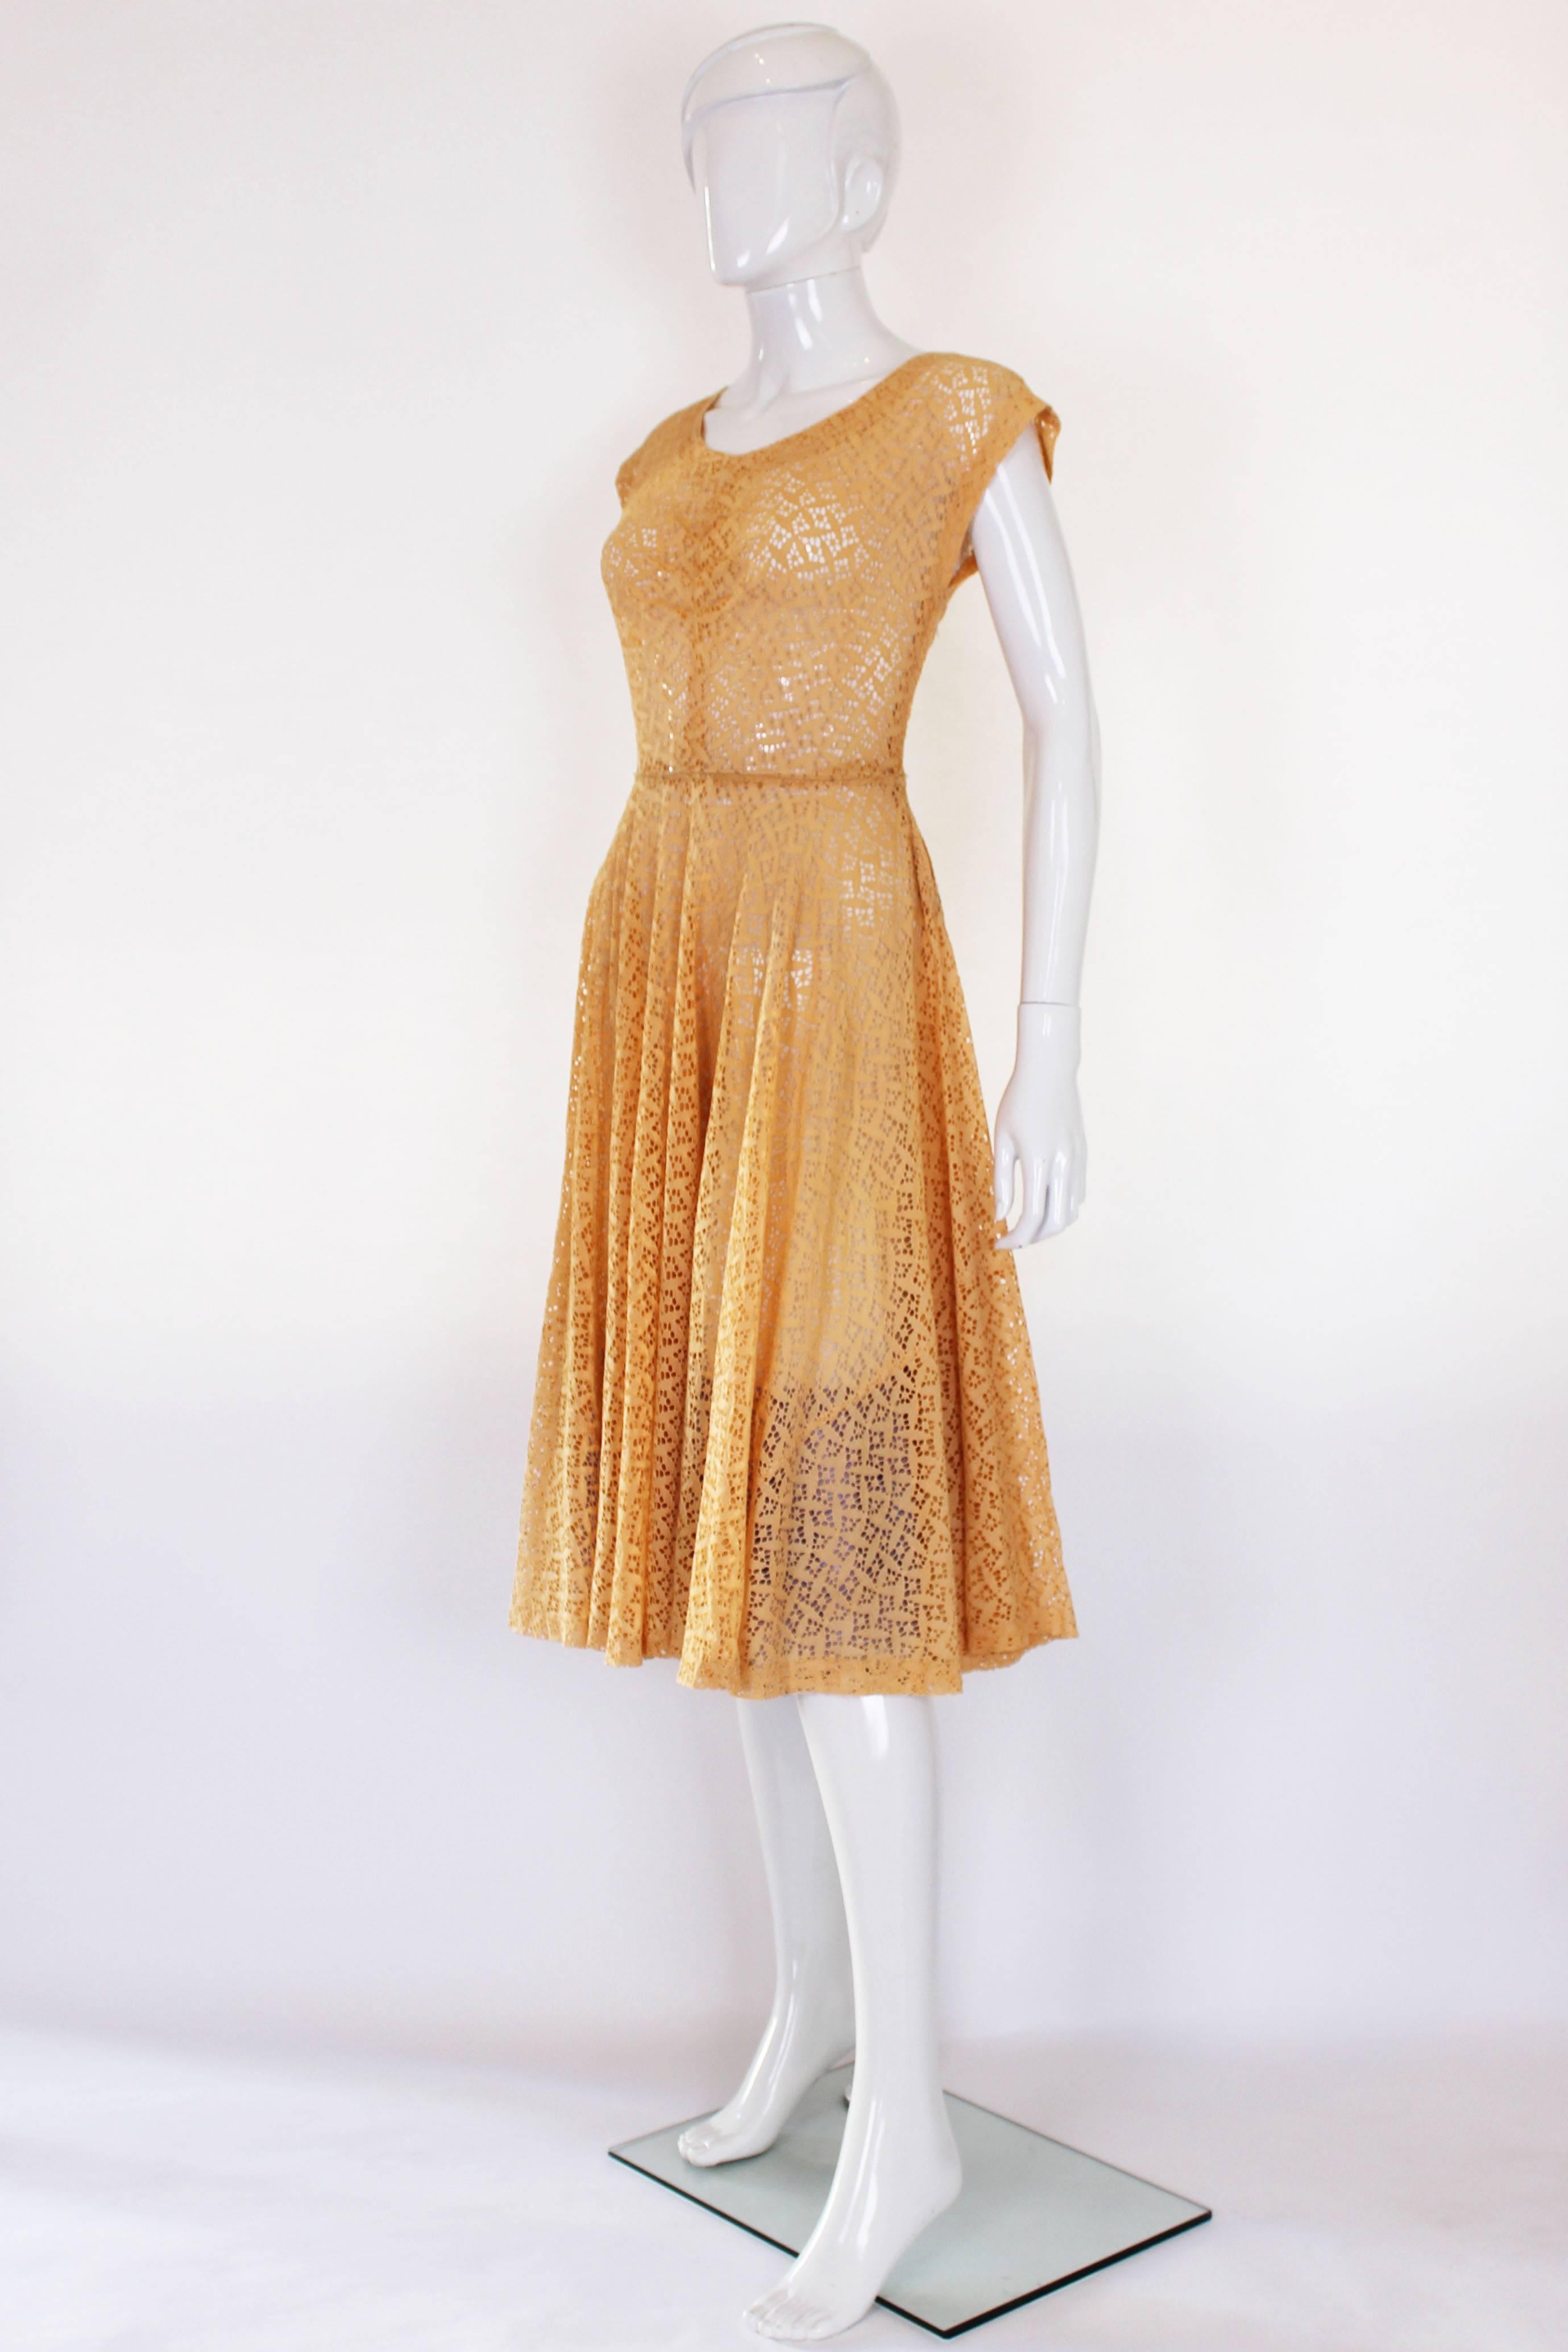 This is a classic 1950s style dress made of an apricot coloured cotton. The fabric is made up of diamond shapes with Broderie Anglaise cut outs so a slip needs to be worn underneath. The bust has a small amount of ruching that gives it shape and the